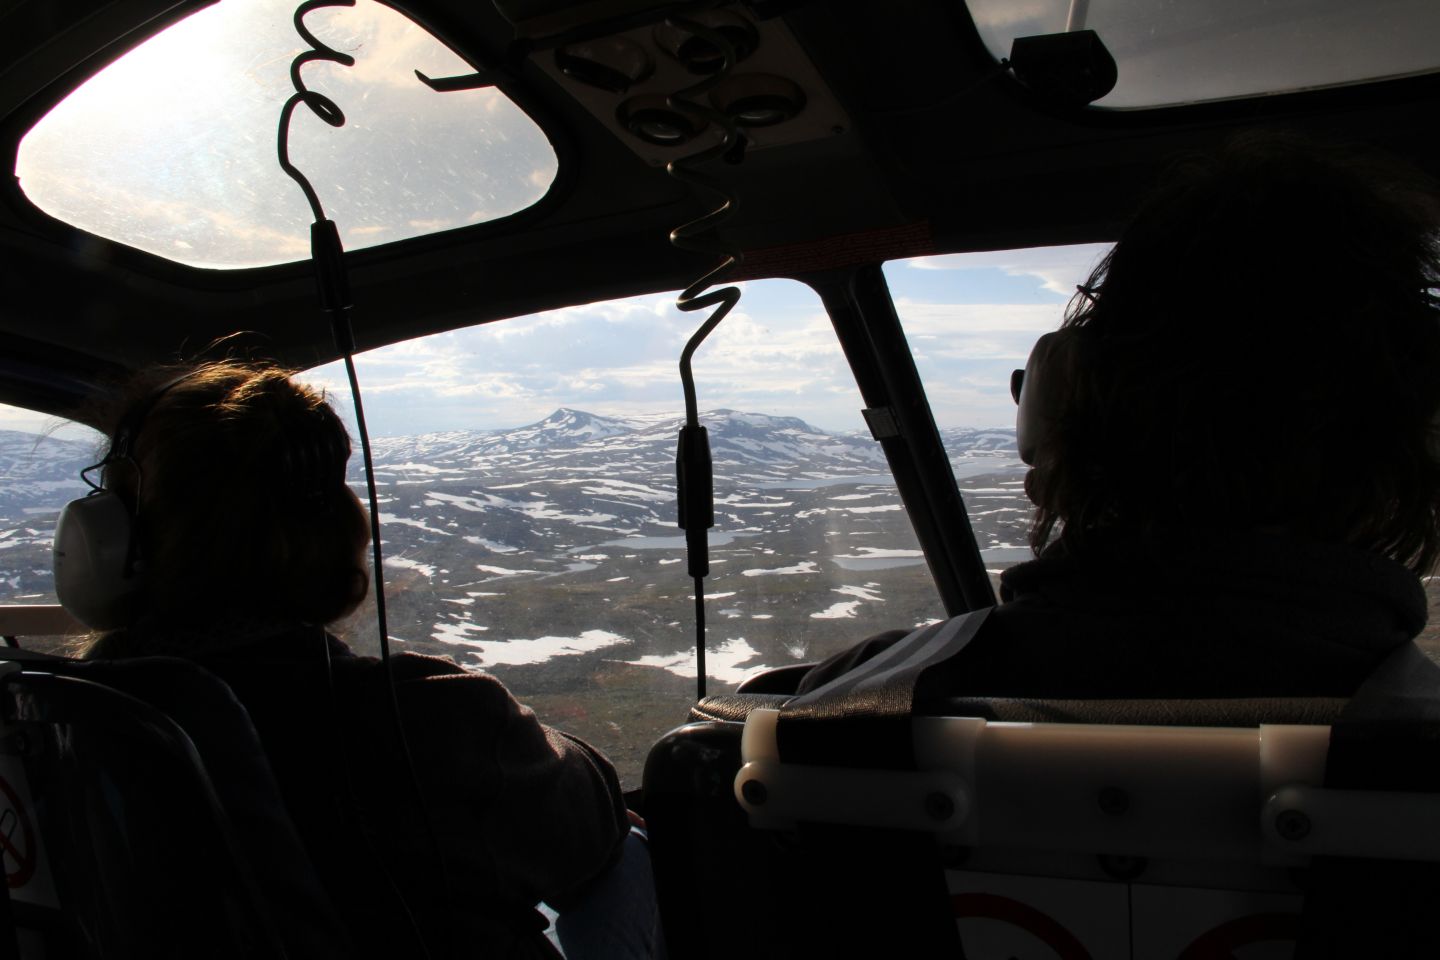 Lori Balton's view of Finnish Lapland from a helicopter